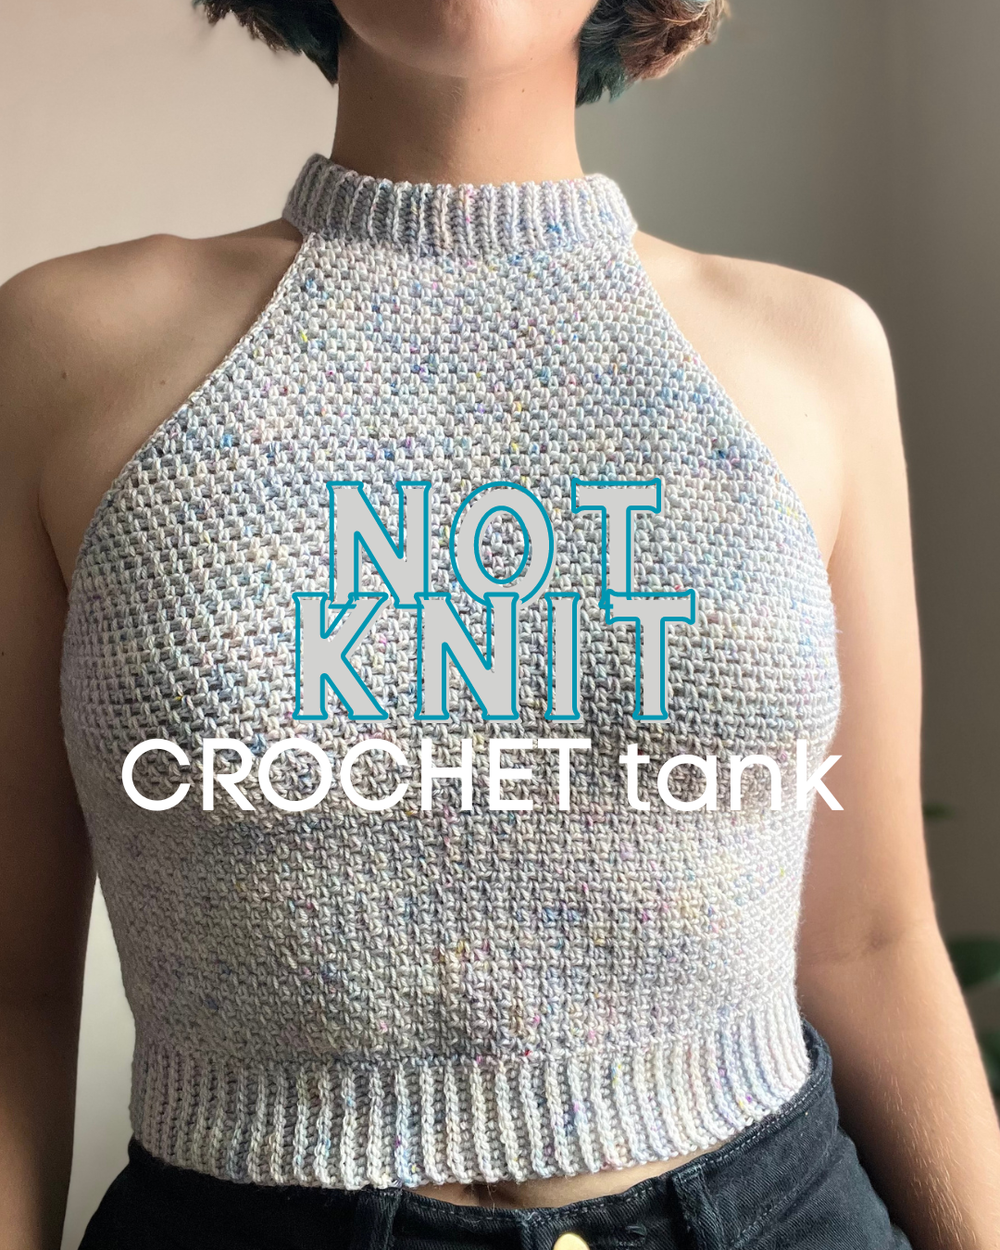 https://images.squarespace-cdn.com/content/v1/62f714bdef4d387389d01c75/1692146388380-90BJXTW6LEVNF58O10SQ/notknitCROCHETtank_cover.png?format=1000w